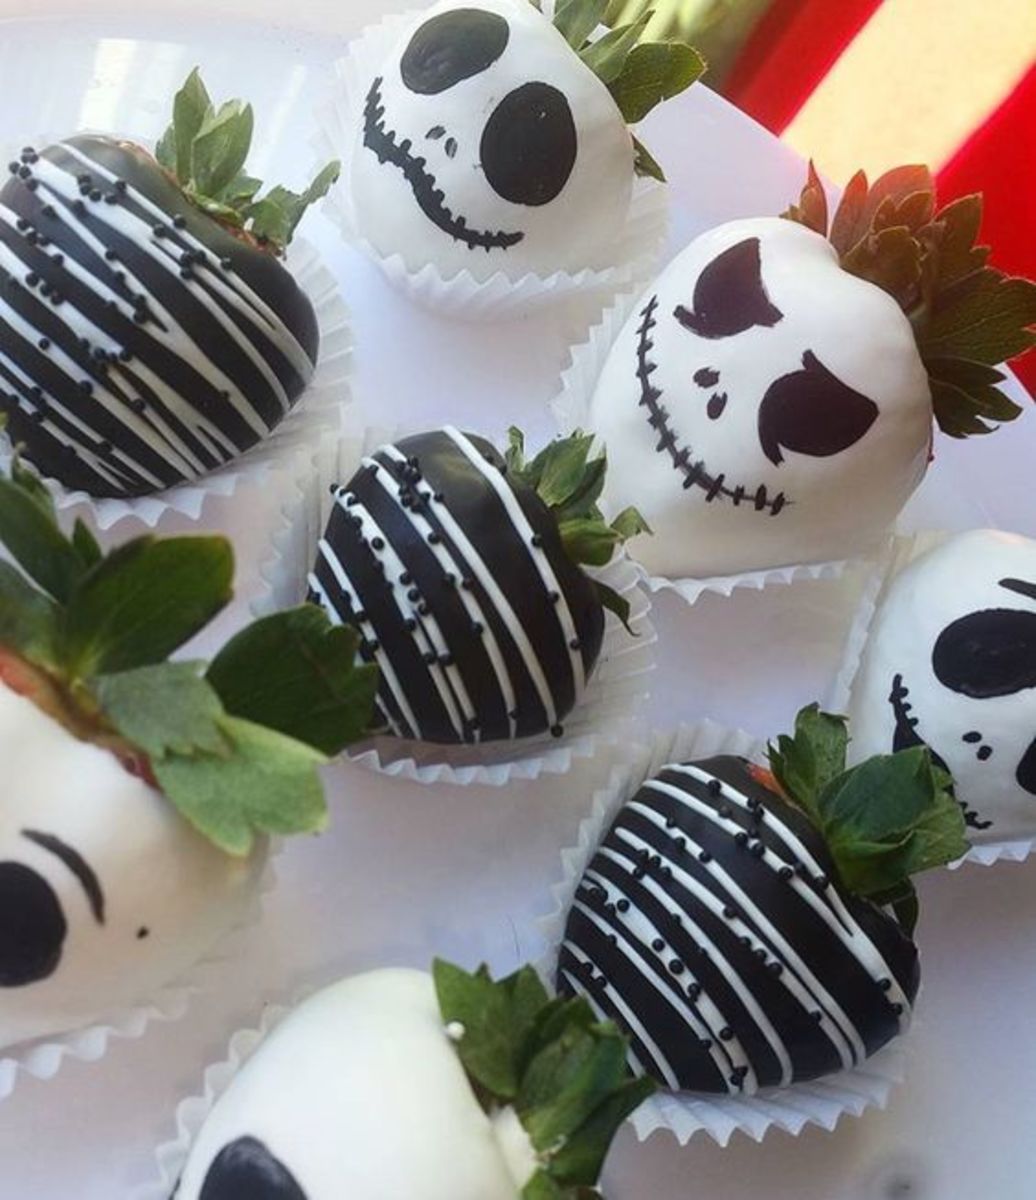 Chocolate and Yogurt-Dipped Strawberries With Spooky Faces